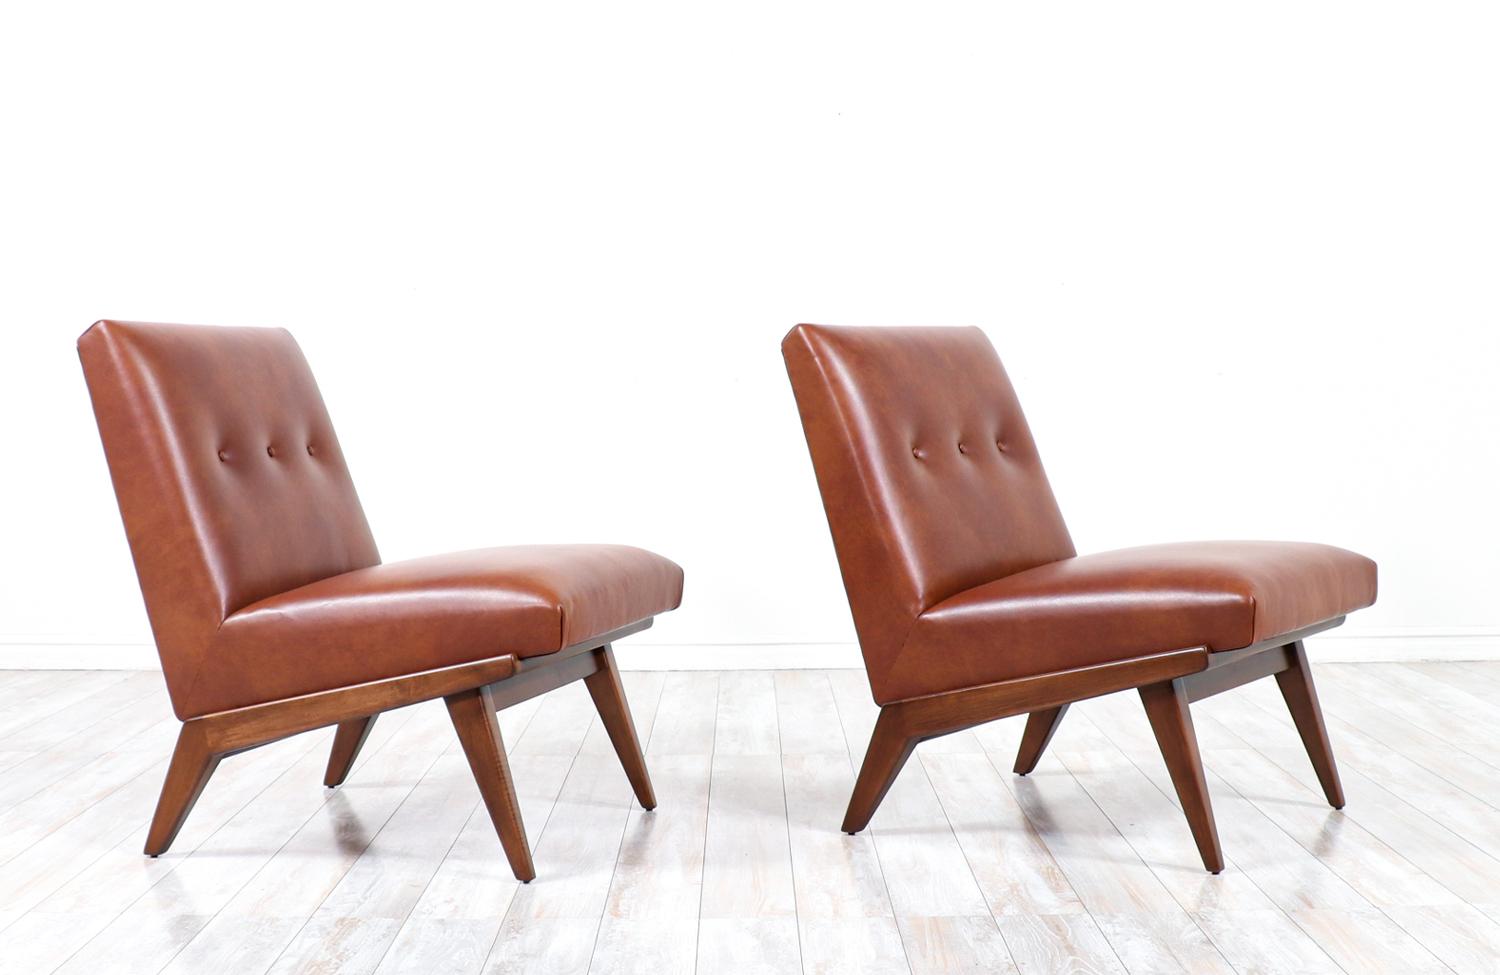 Jens Risom Cognac Leather Slipper Lounge Chairs for Knoll

________________________________________

Transforming a piece of Mid-Century Modern furniture is like bringing history back to life, and we take this journey with passion and precision.